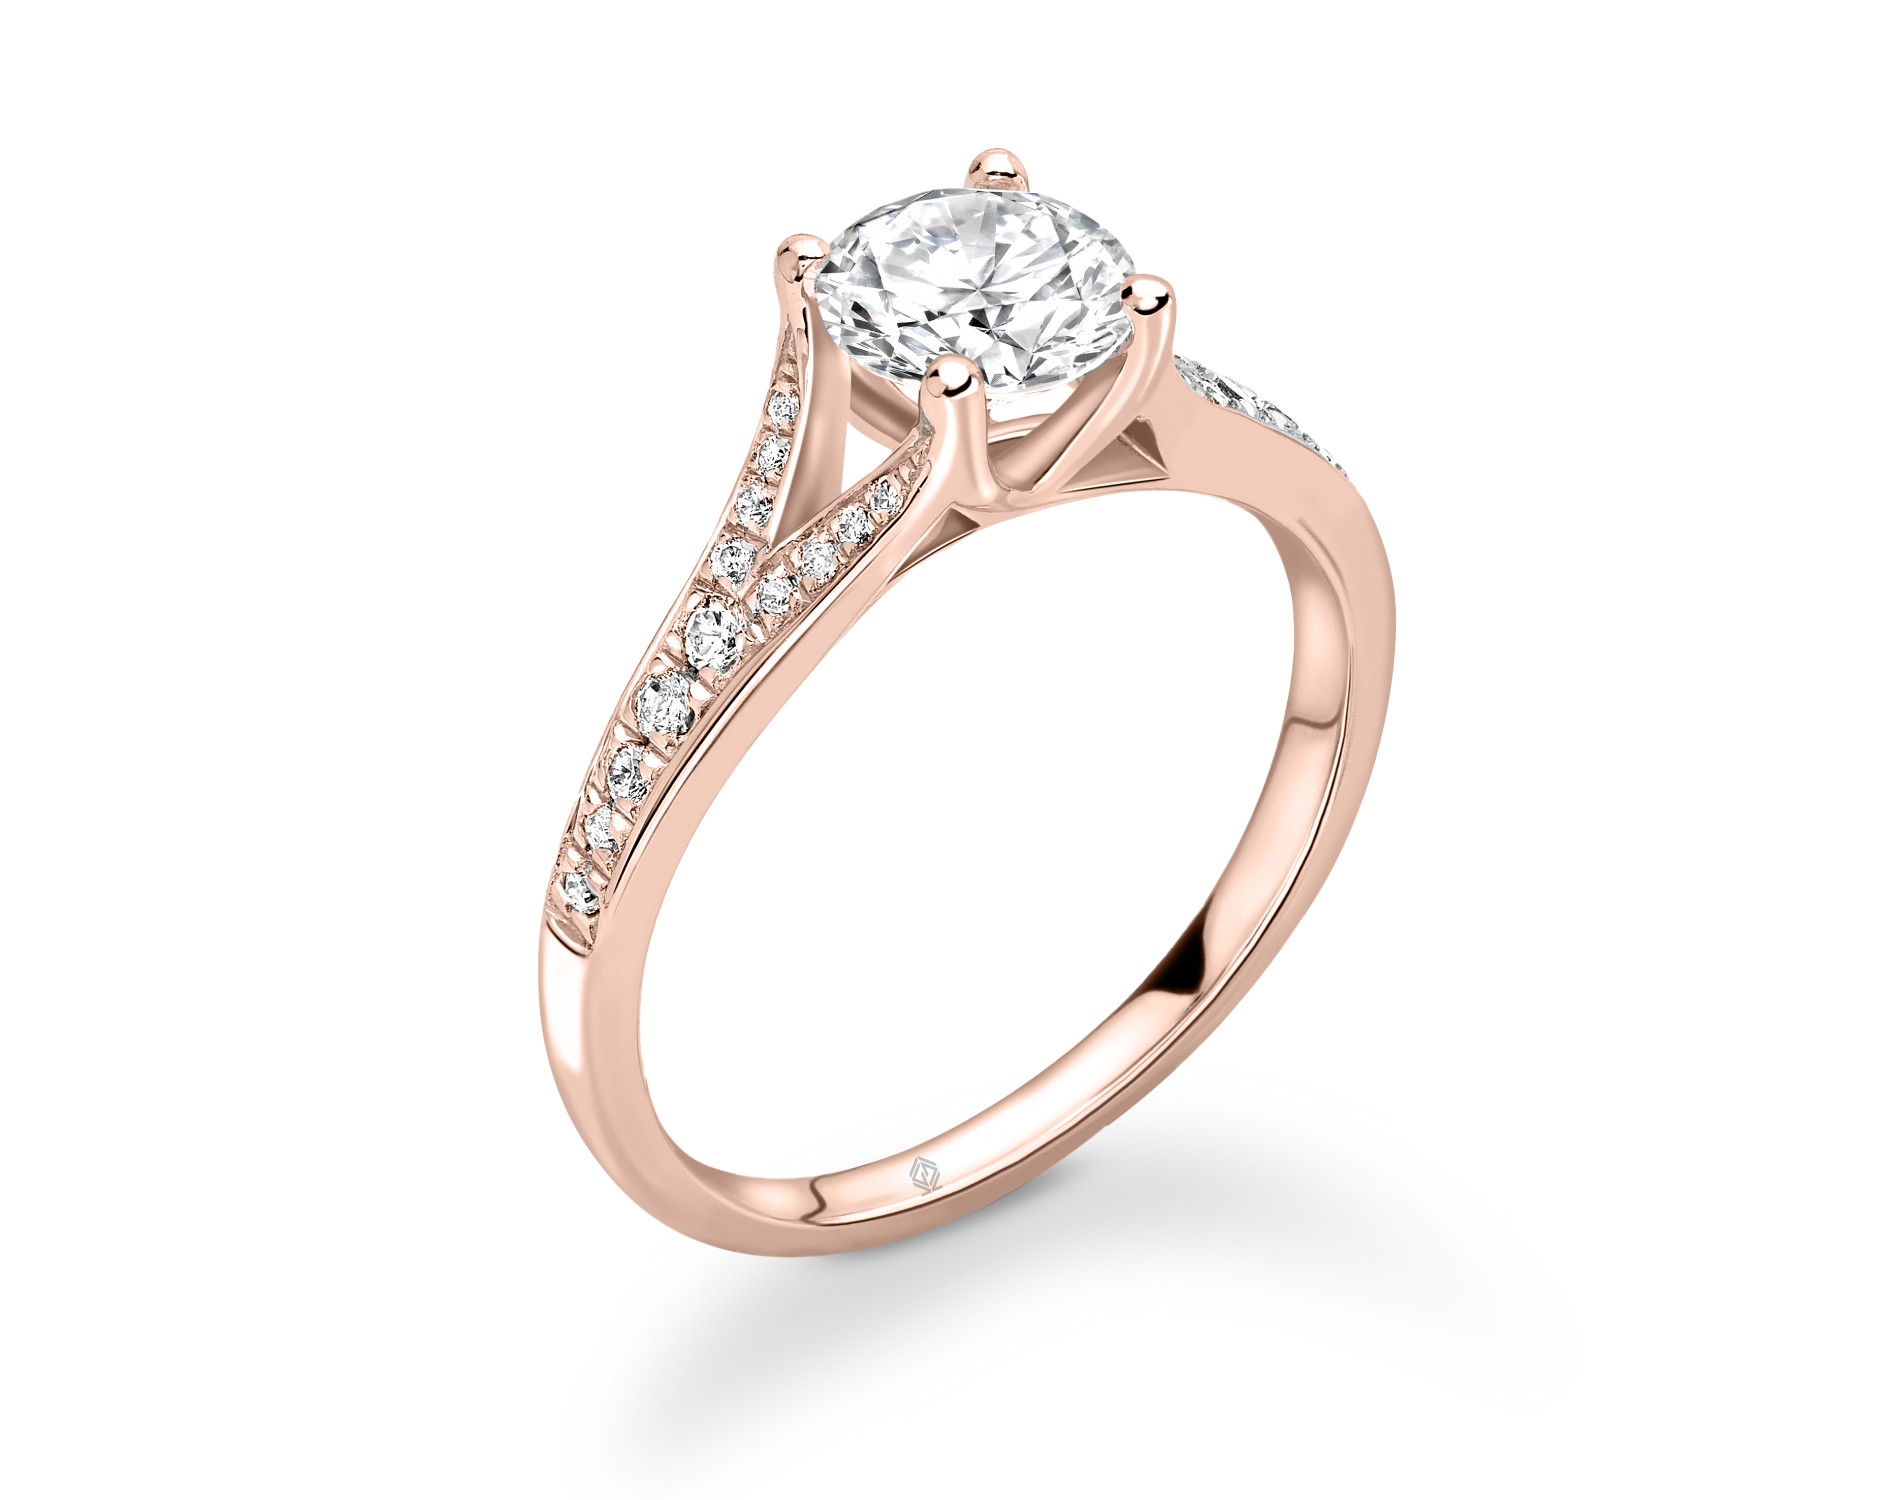 18K ROSE GOLD ROUND CUT 4 PRONGS DIAMOND ENGAGEMENT RING WITH SPLIT SHANK AND SIDE STONES